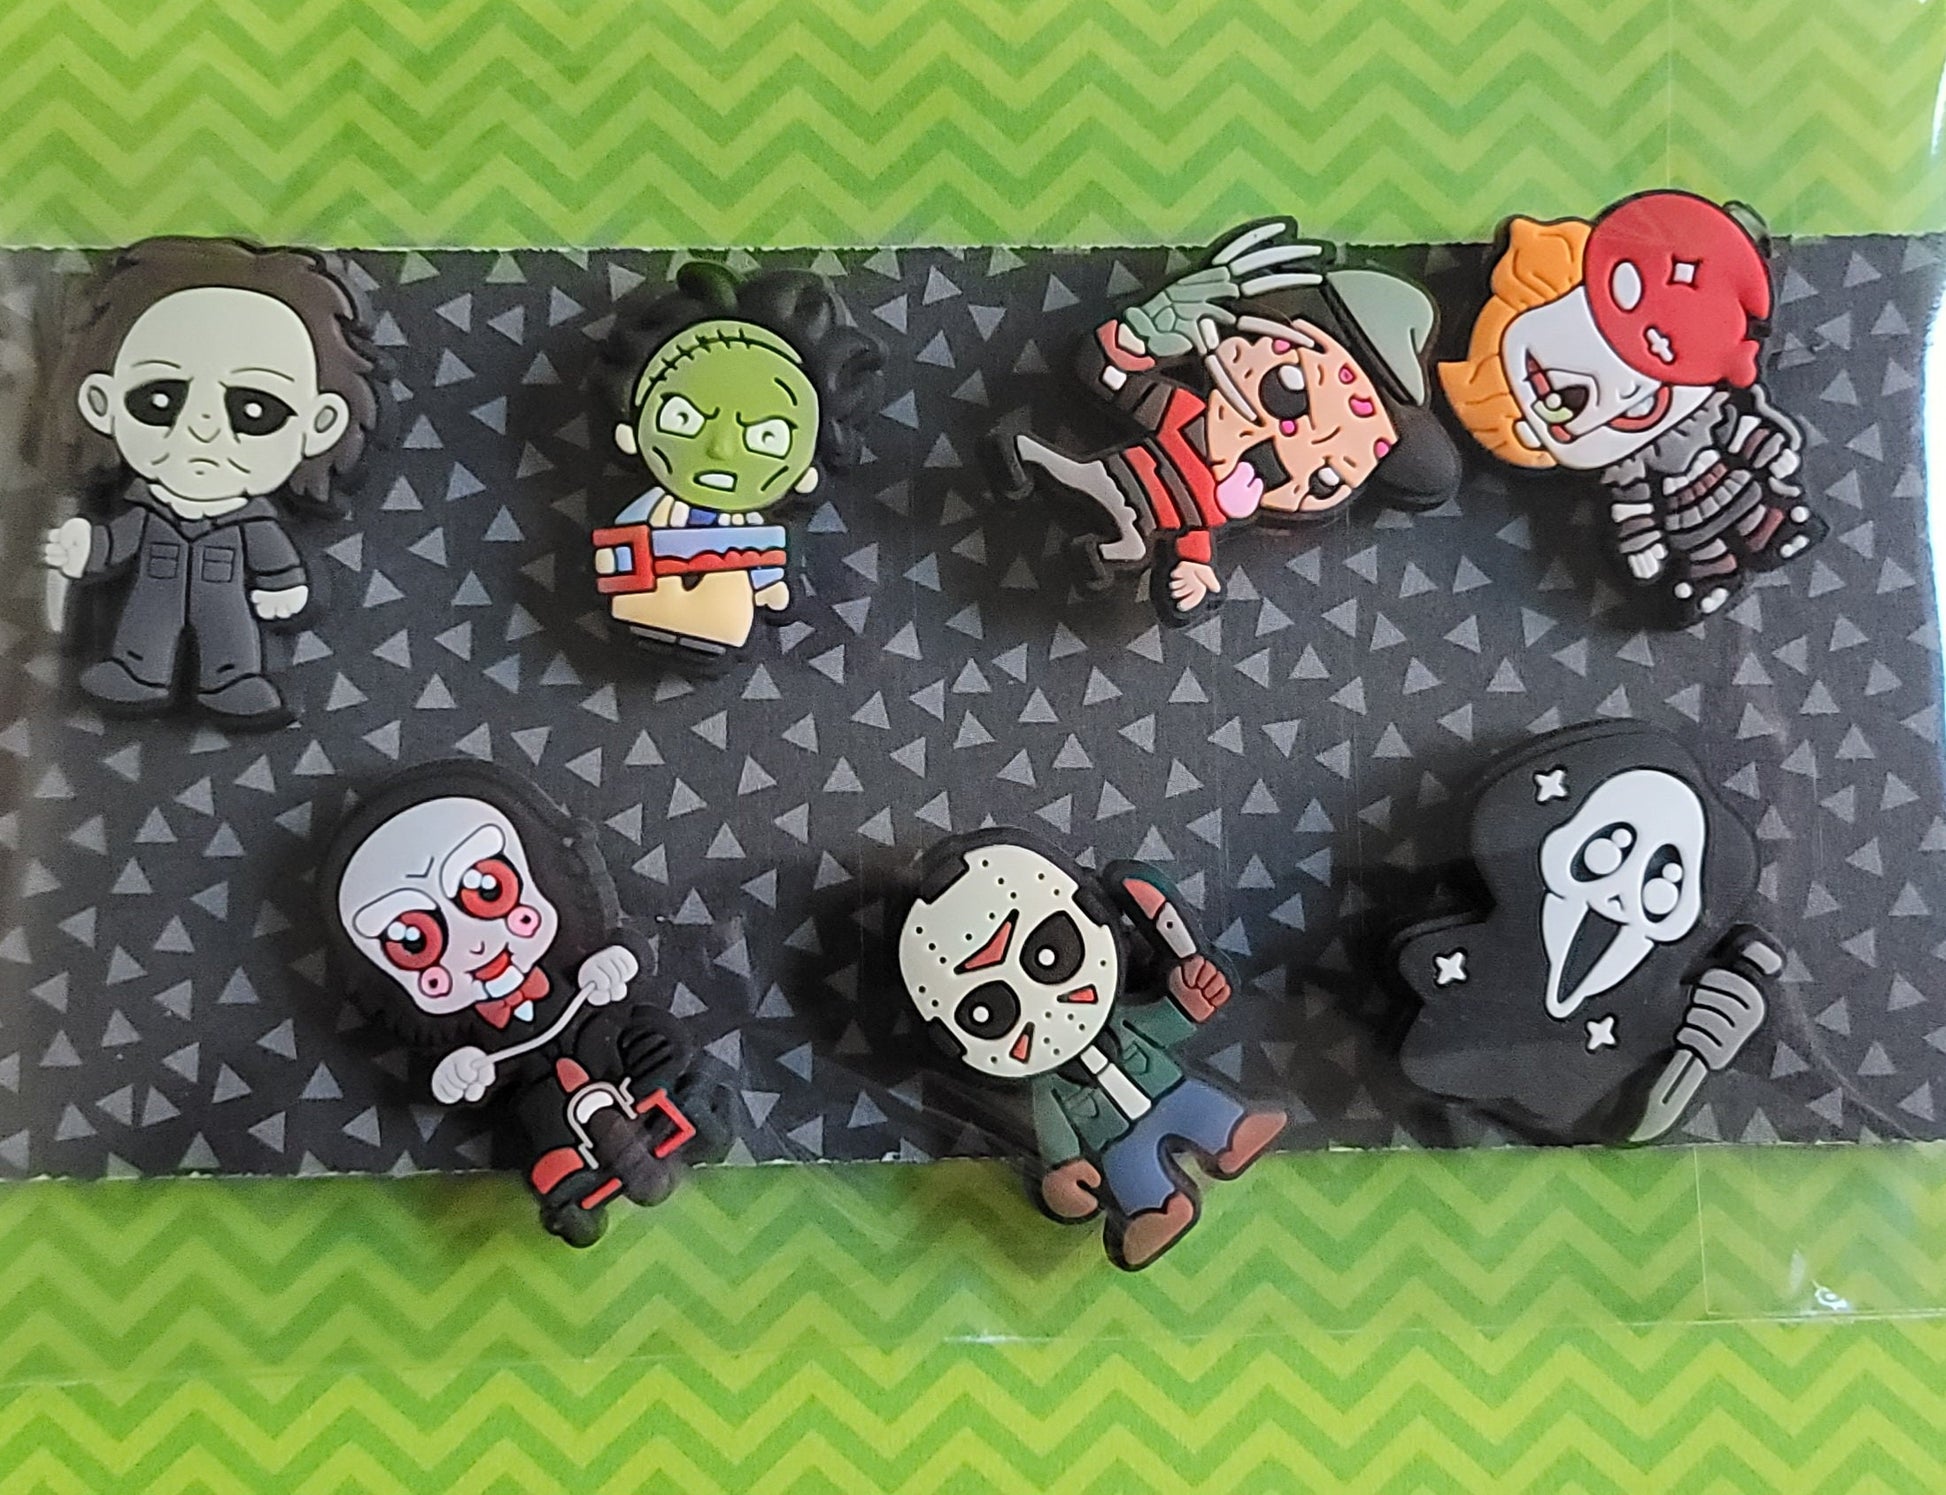 Horror Movie Inspired Croc Charms